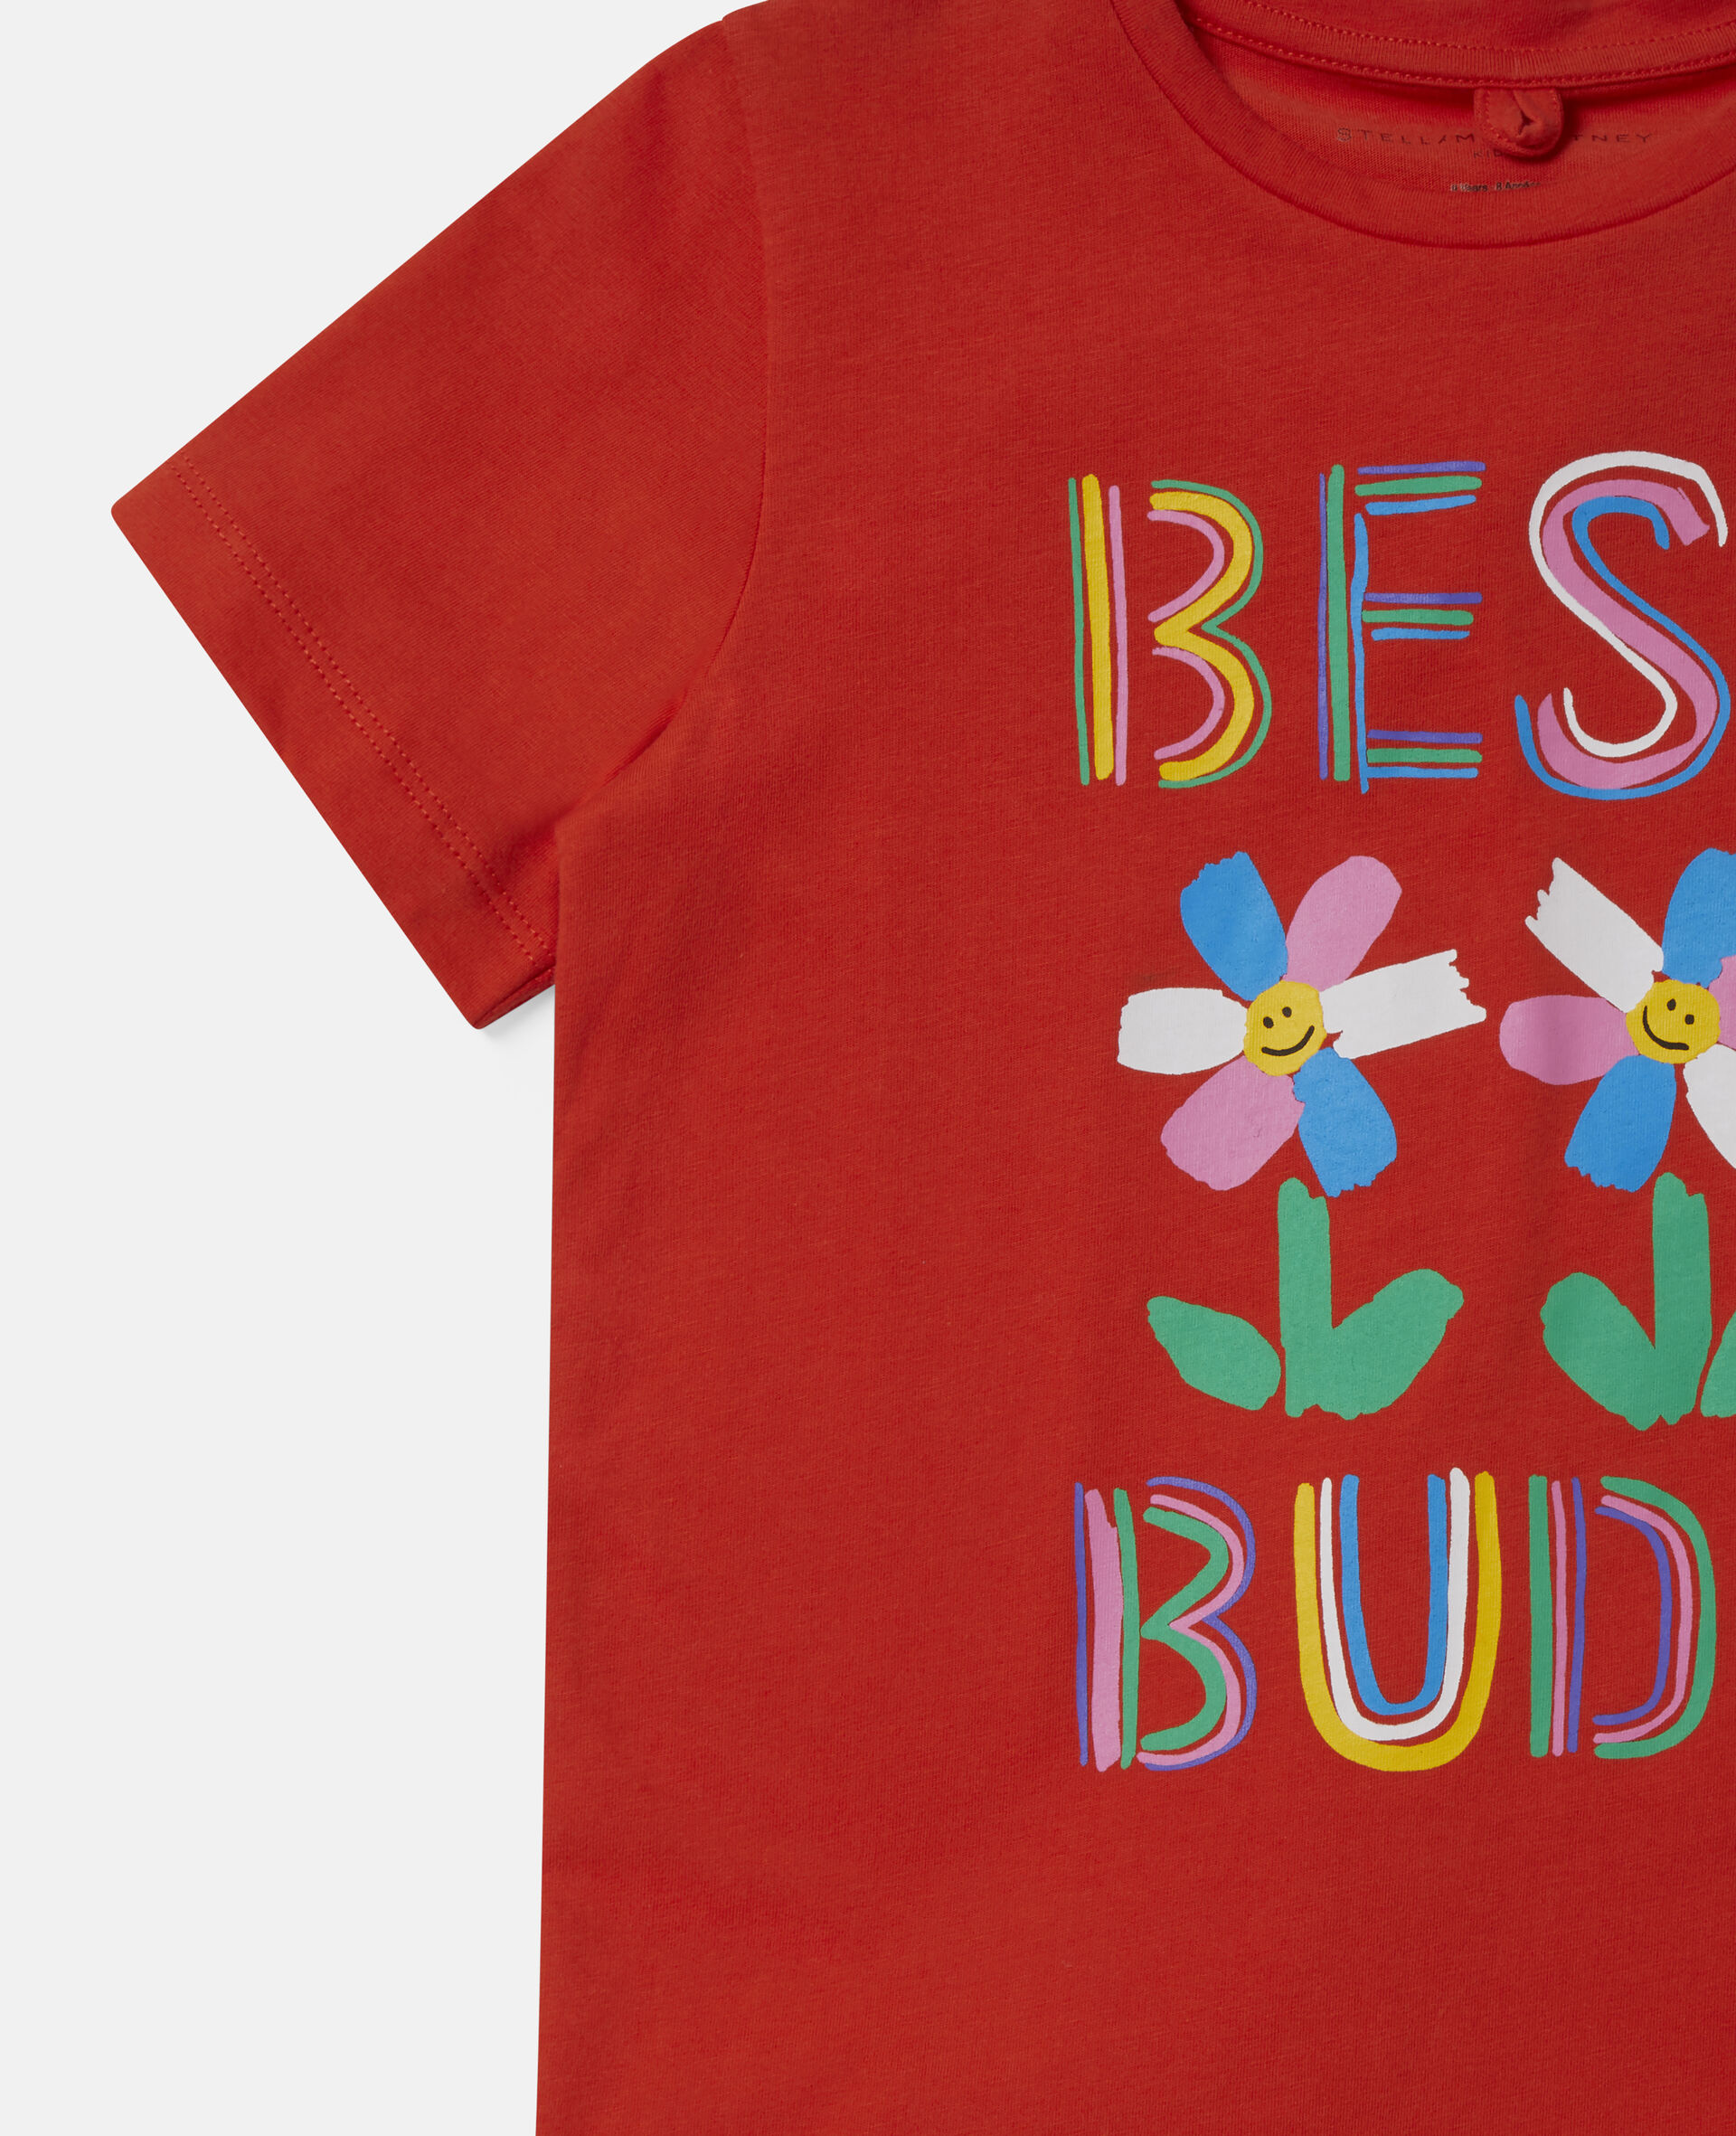 Best Buds' Cotton T-shirt-Red-large image number 2